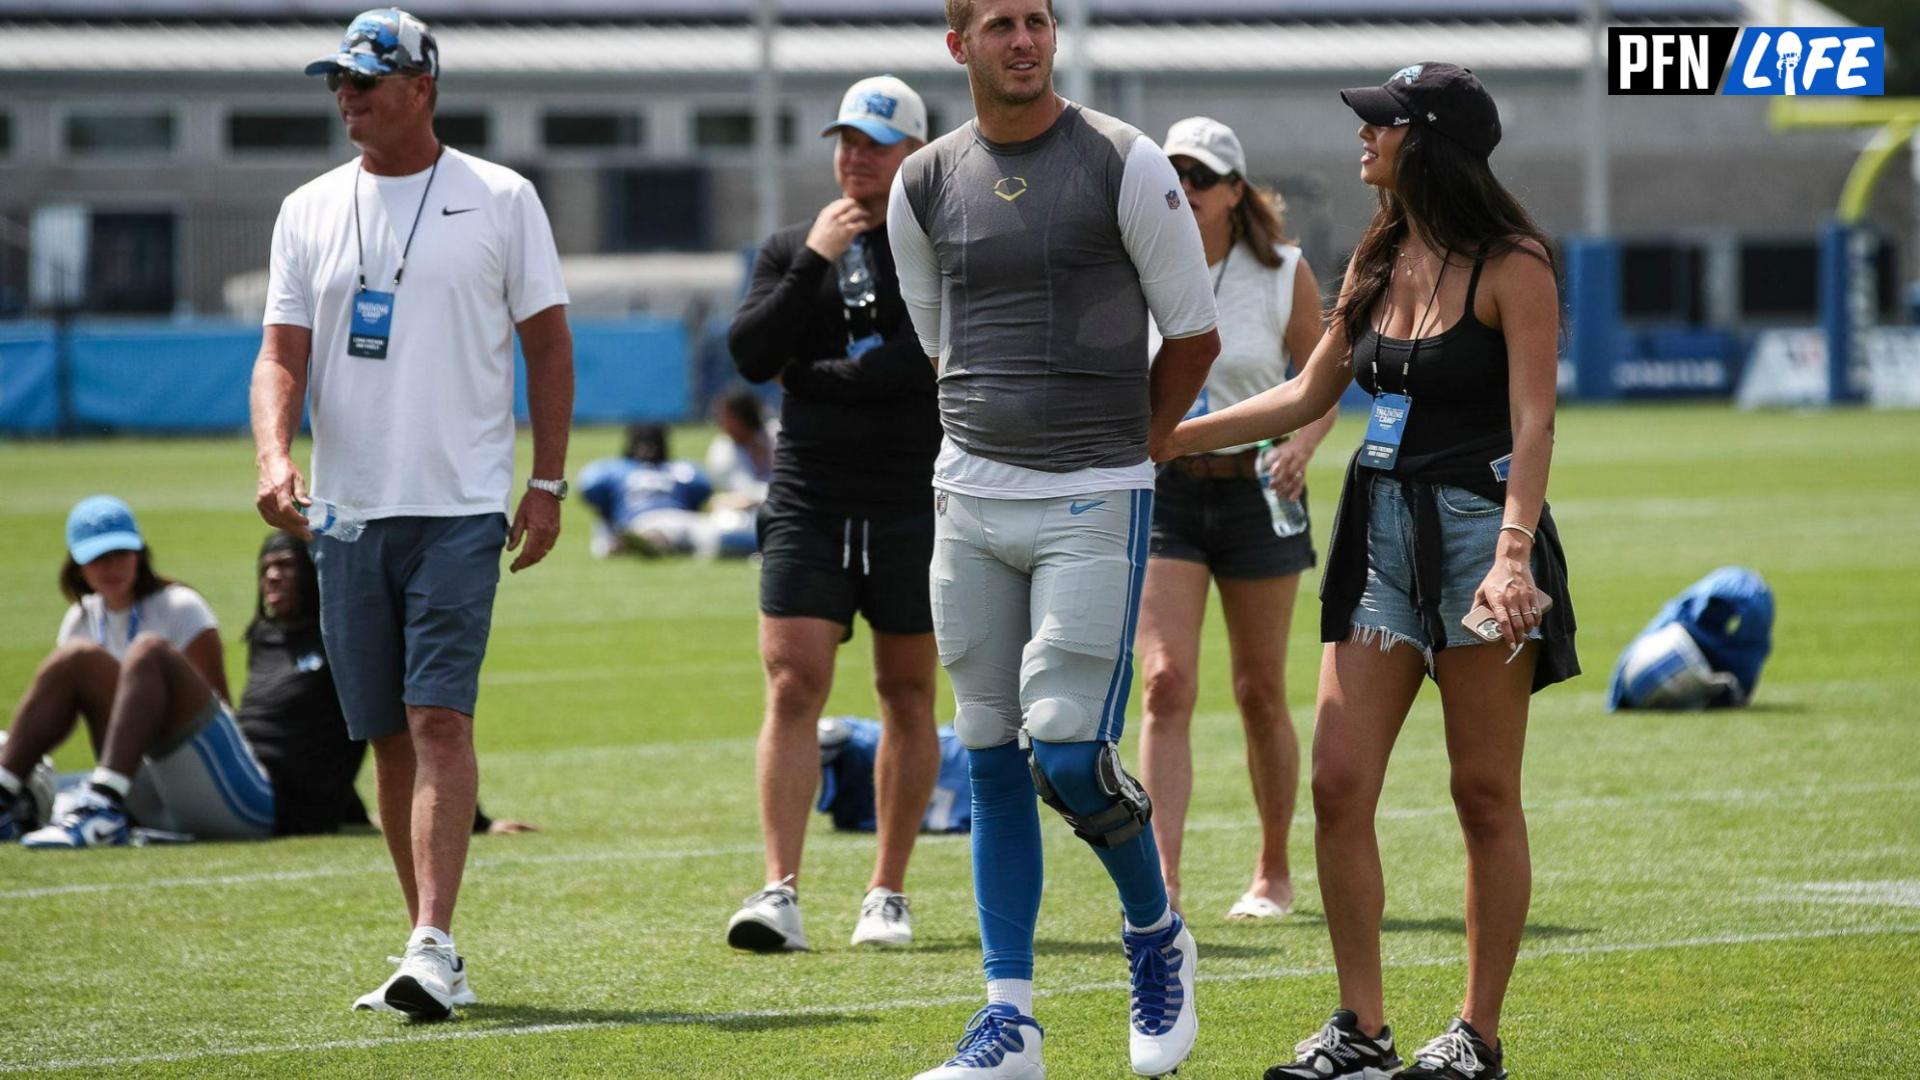 Detroit Lions quarterback Jared Goff and his fiancee Christen Harper walk off the field after the joint practice with New York Giants at Detroit Lions headquarters and training facility in Allen Park